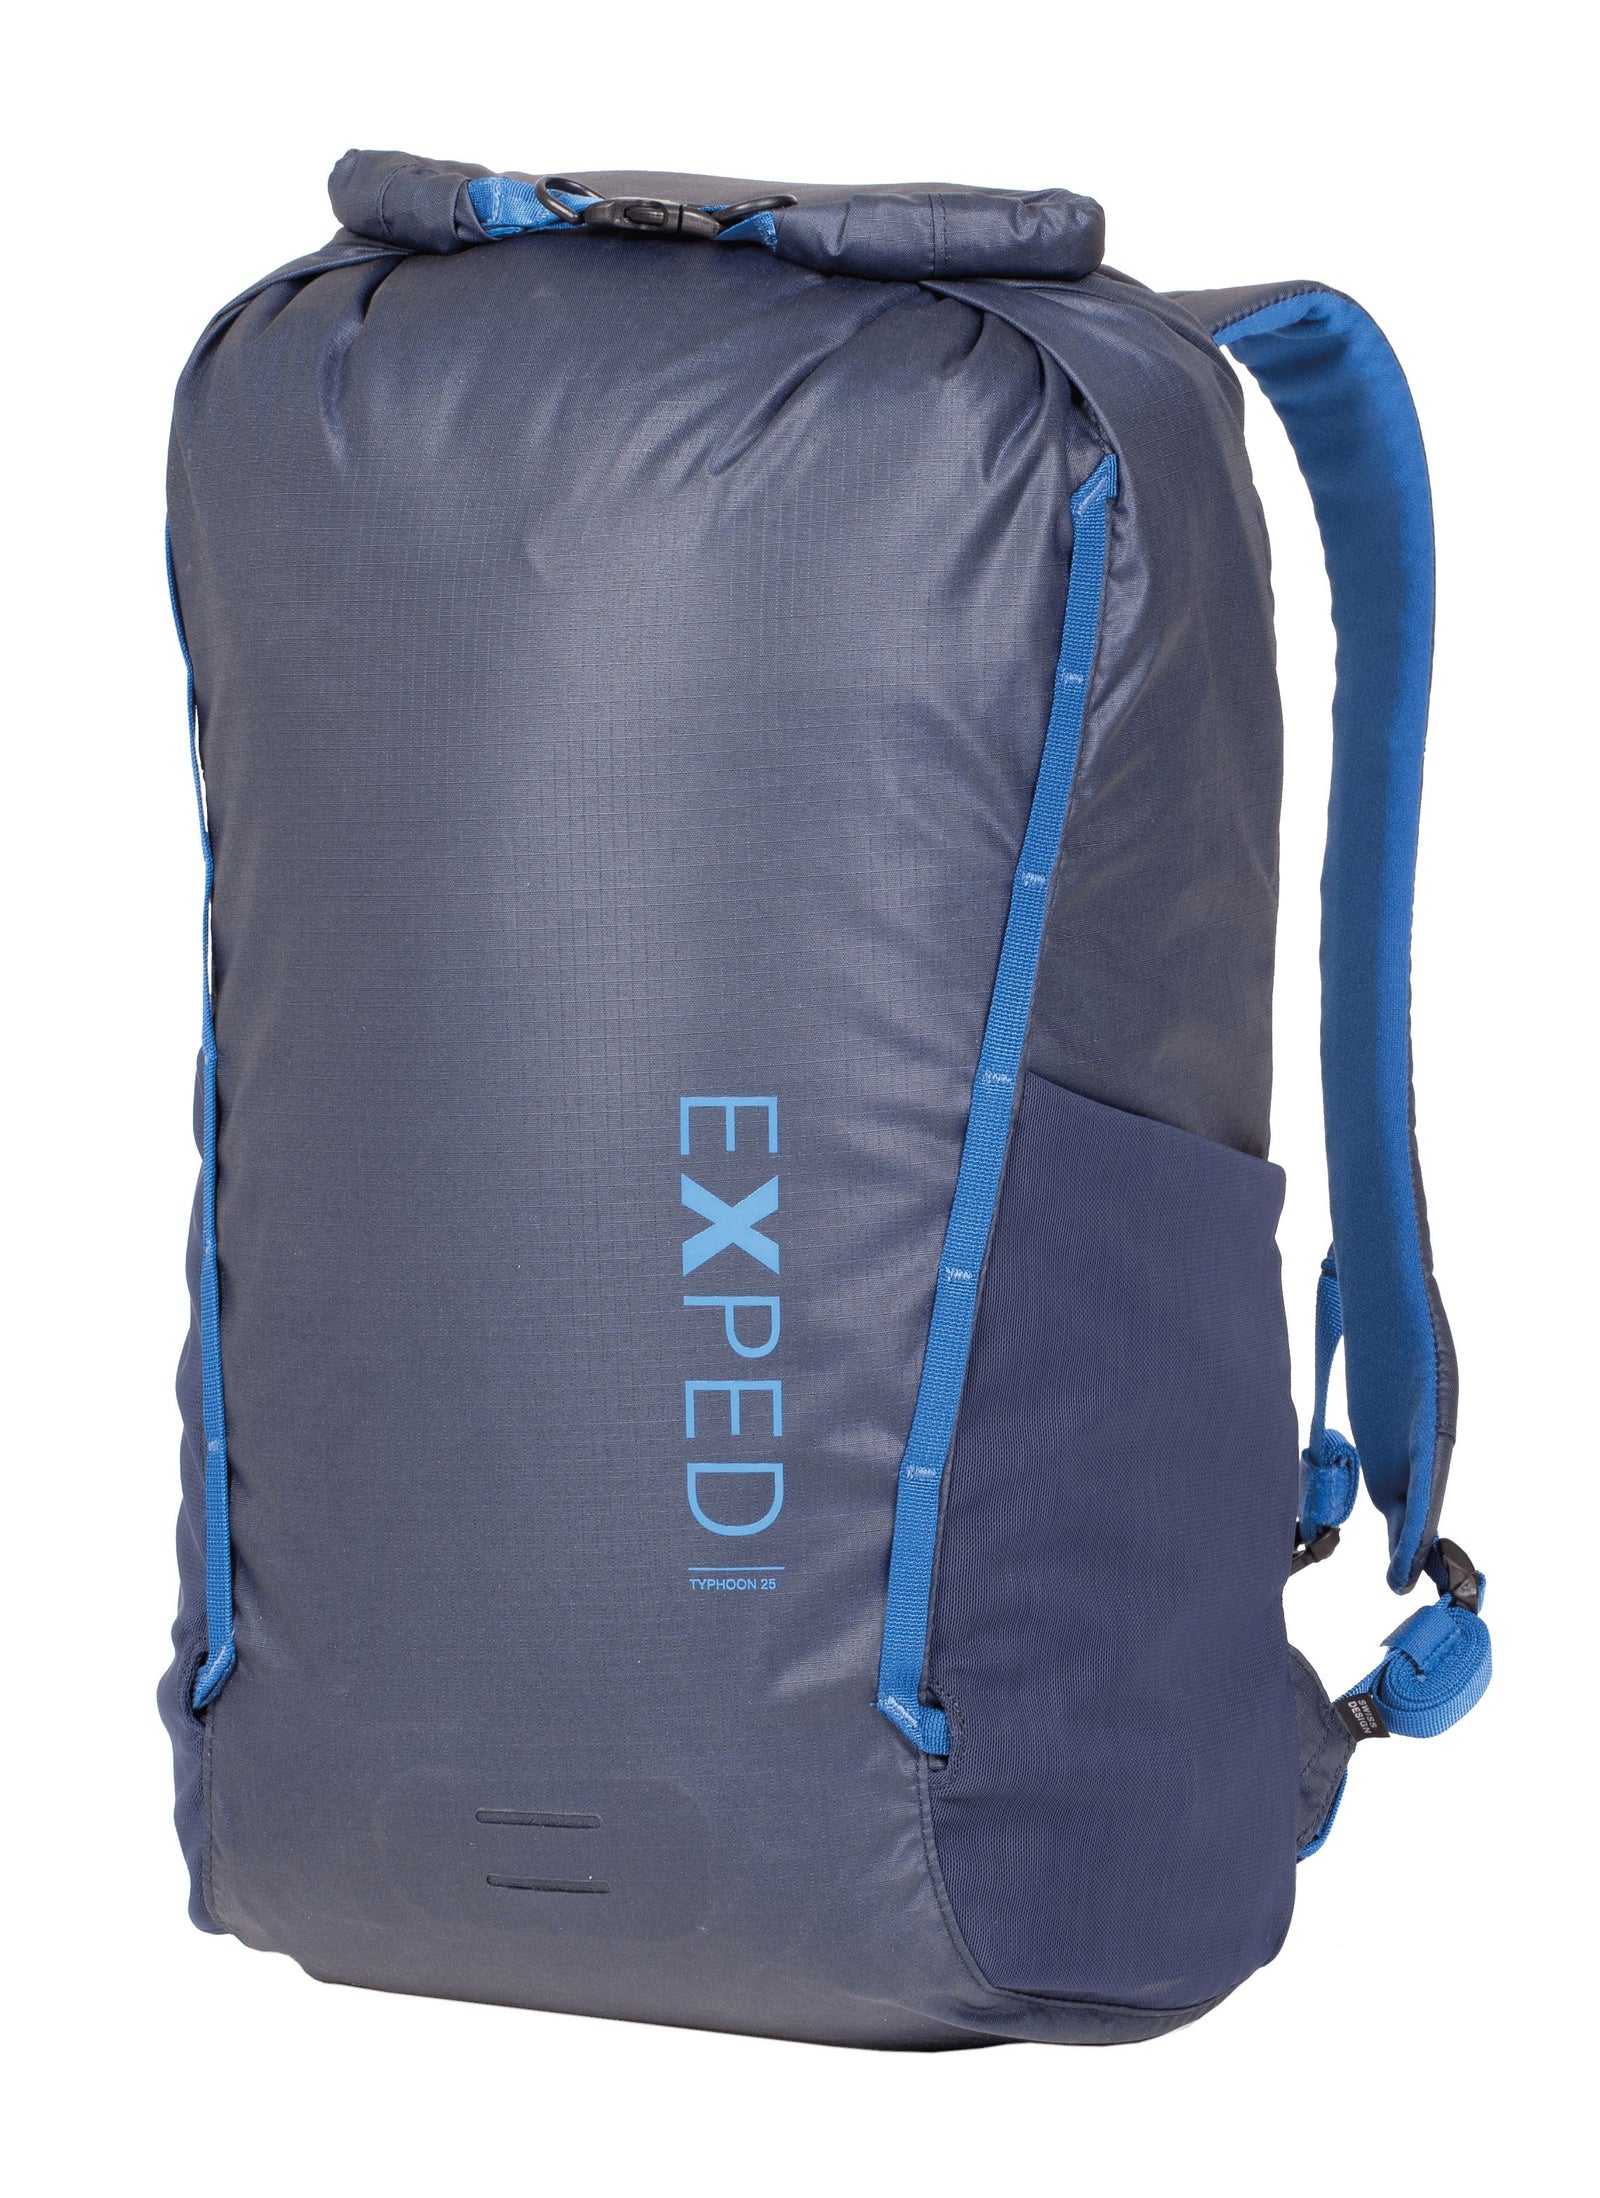 EXPED Typhoon 25 Backpack Navy 